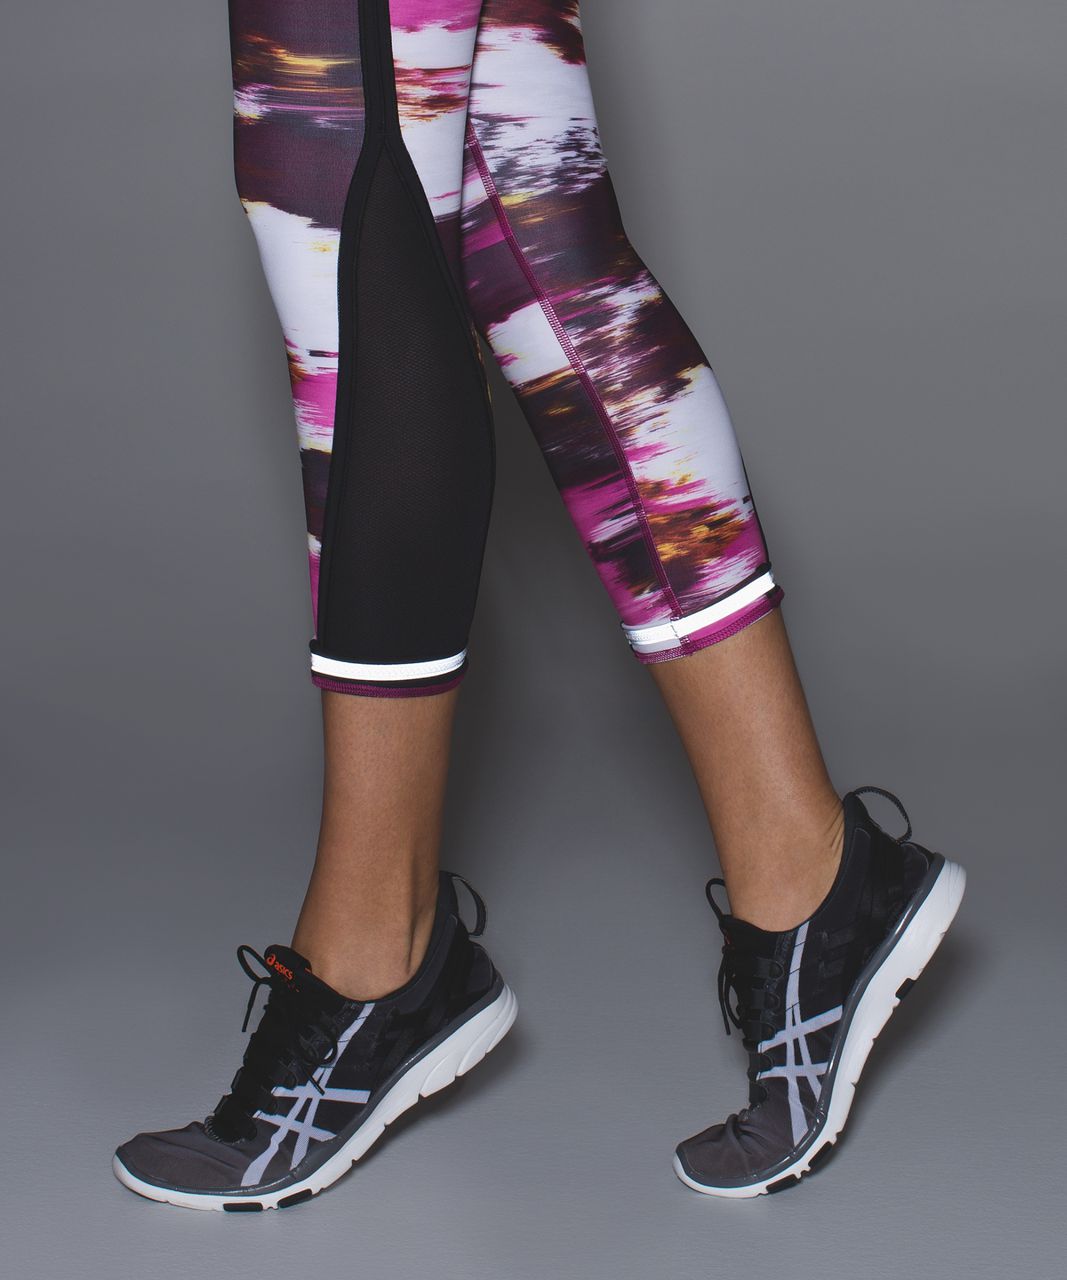 Lululemon Pace Tight *Full-on Luxtreme - Pigment Wind Berry Rumble Multi / Black